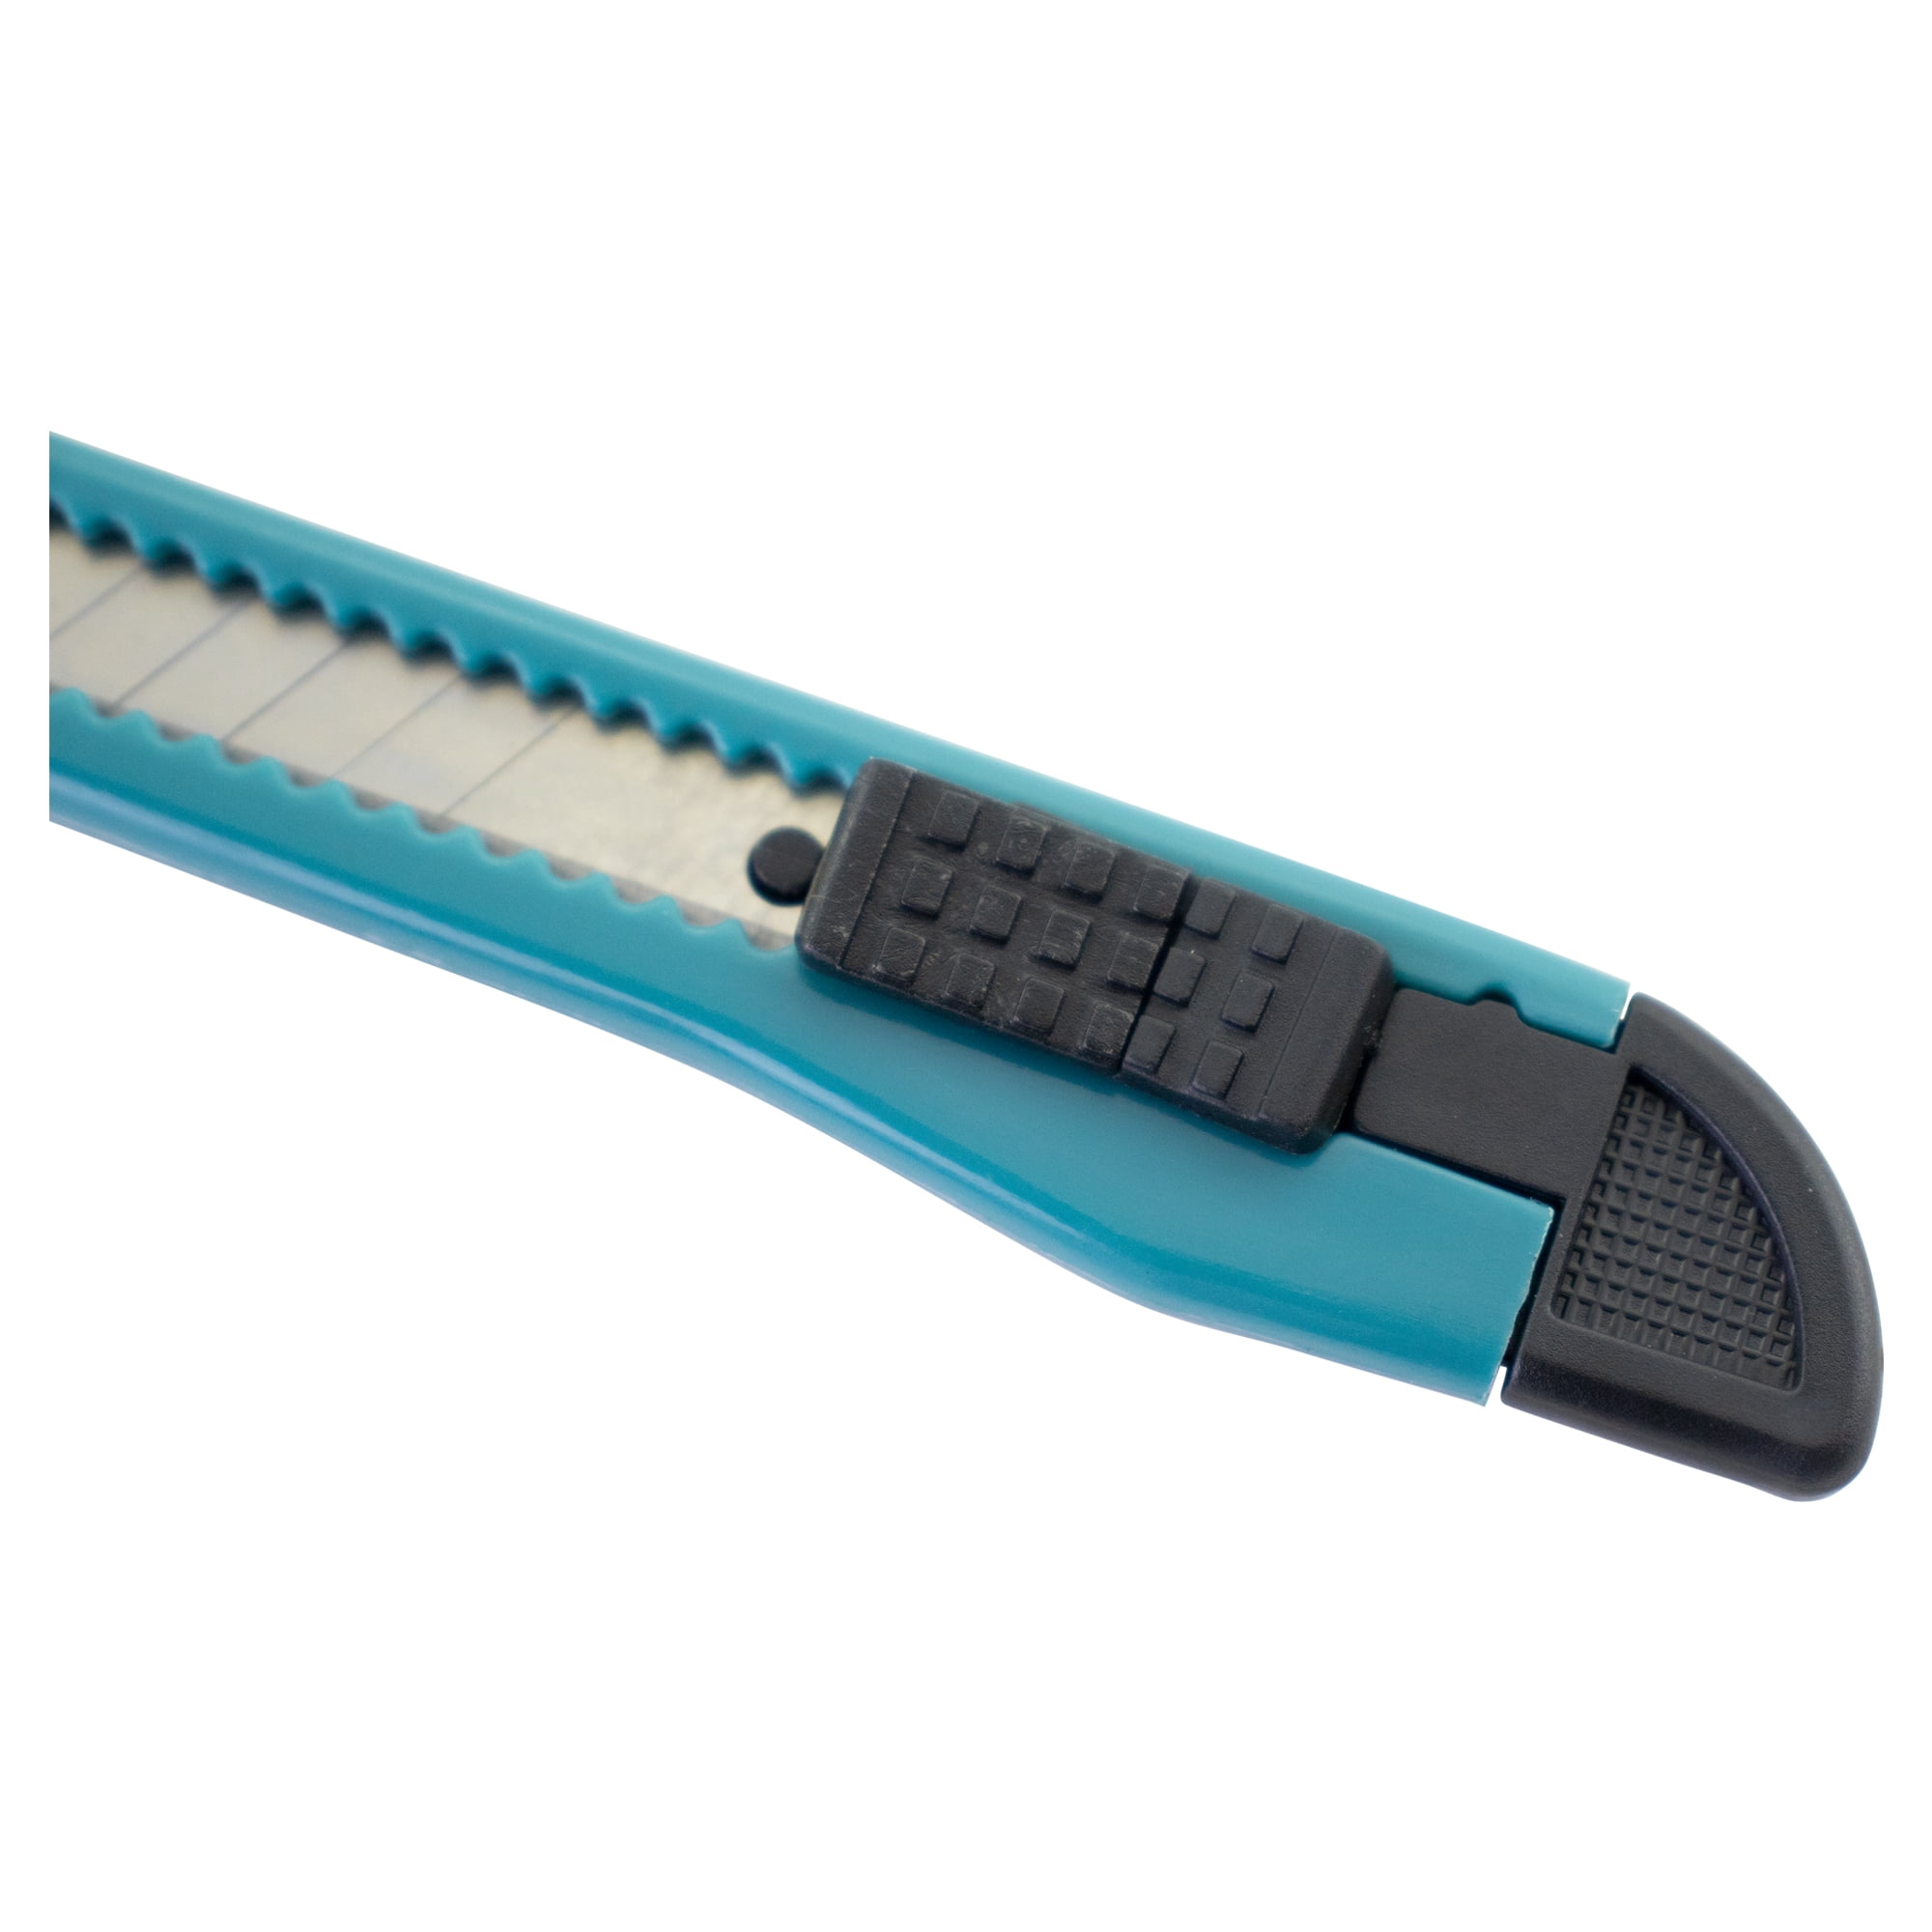 Motoproducts 2 Turquoise Retractable Utility Knife Wholesale 6 inch Manual Lock Box Cutter Snap Off Blade, Blue